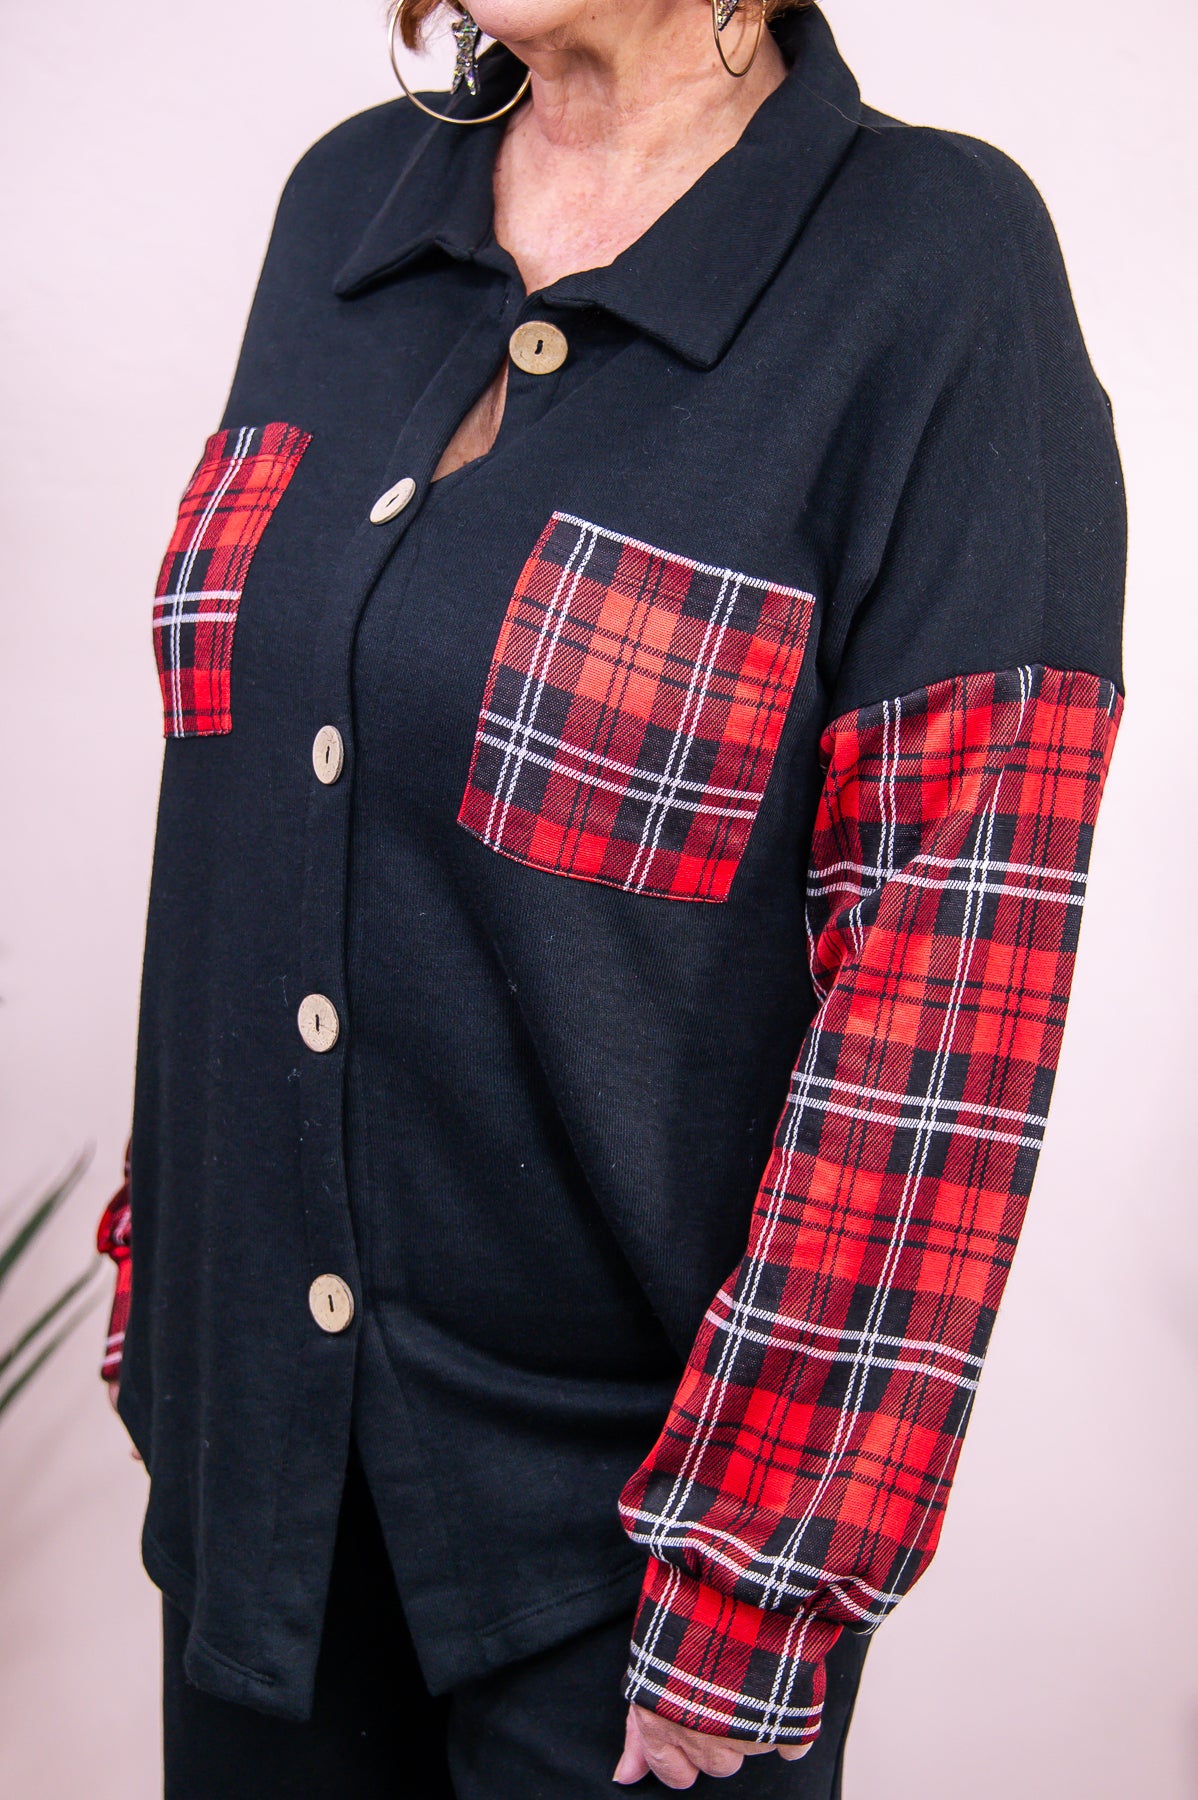 Stand Out From The Crowd Black/Red/White Plaid Top - T8792BK